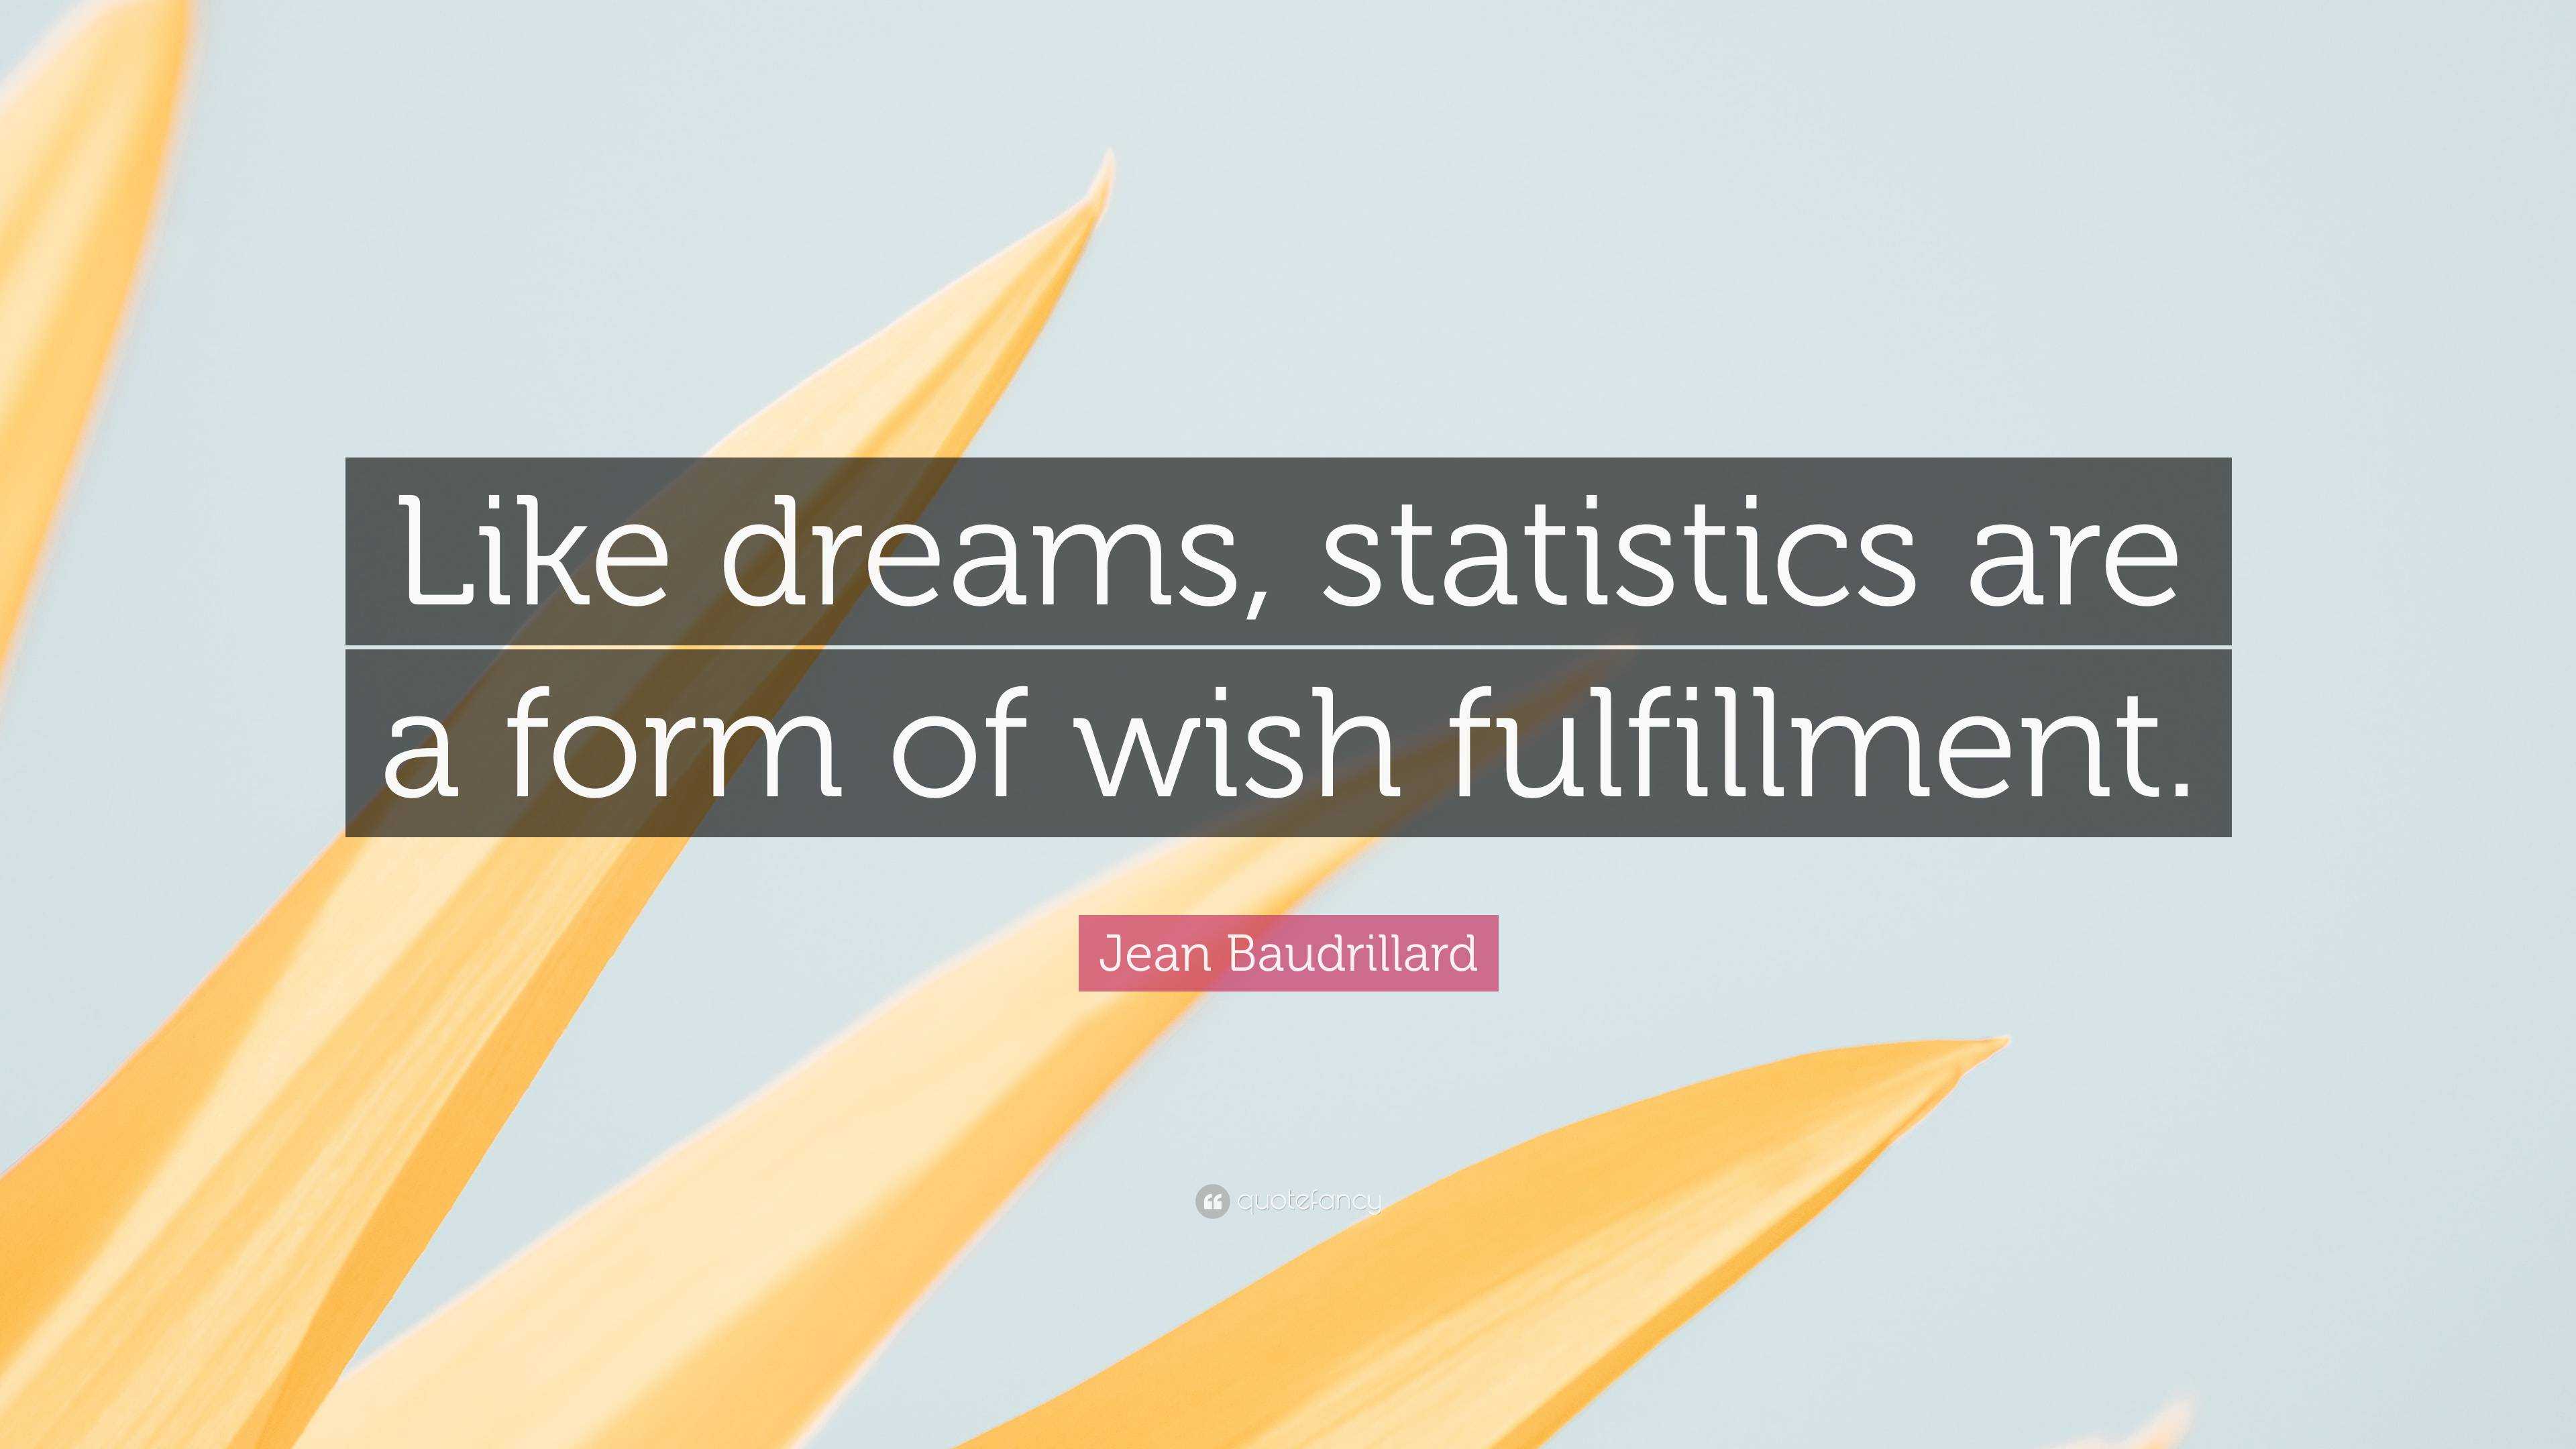 jean-baudrillard-quote-like-dreams-statistics-are-a-form-of-wish